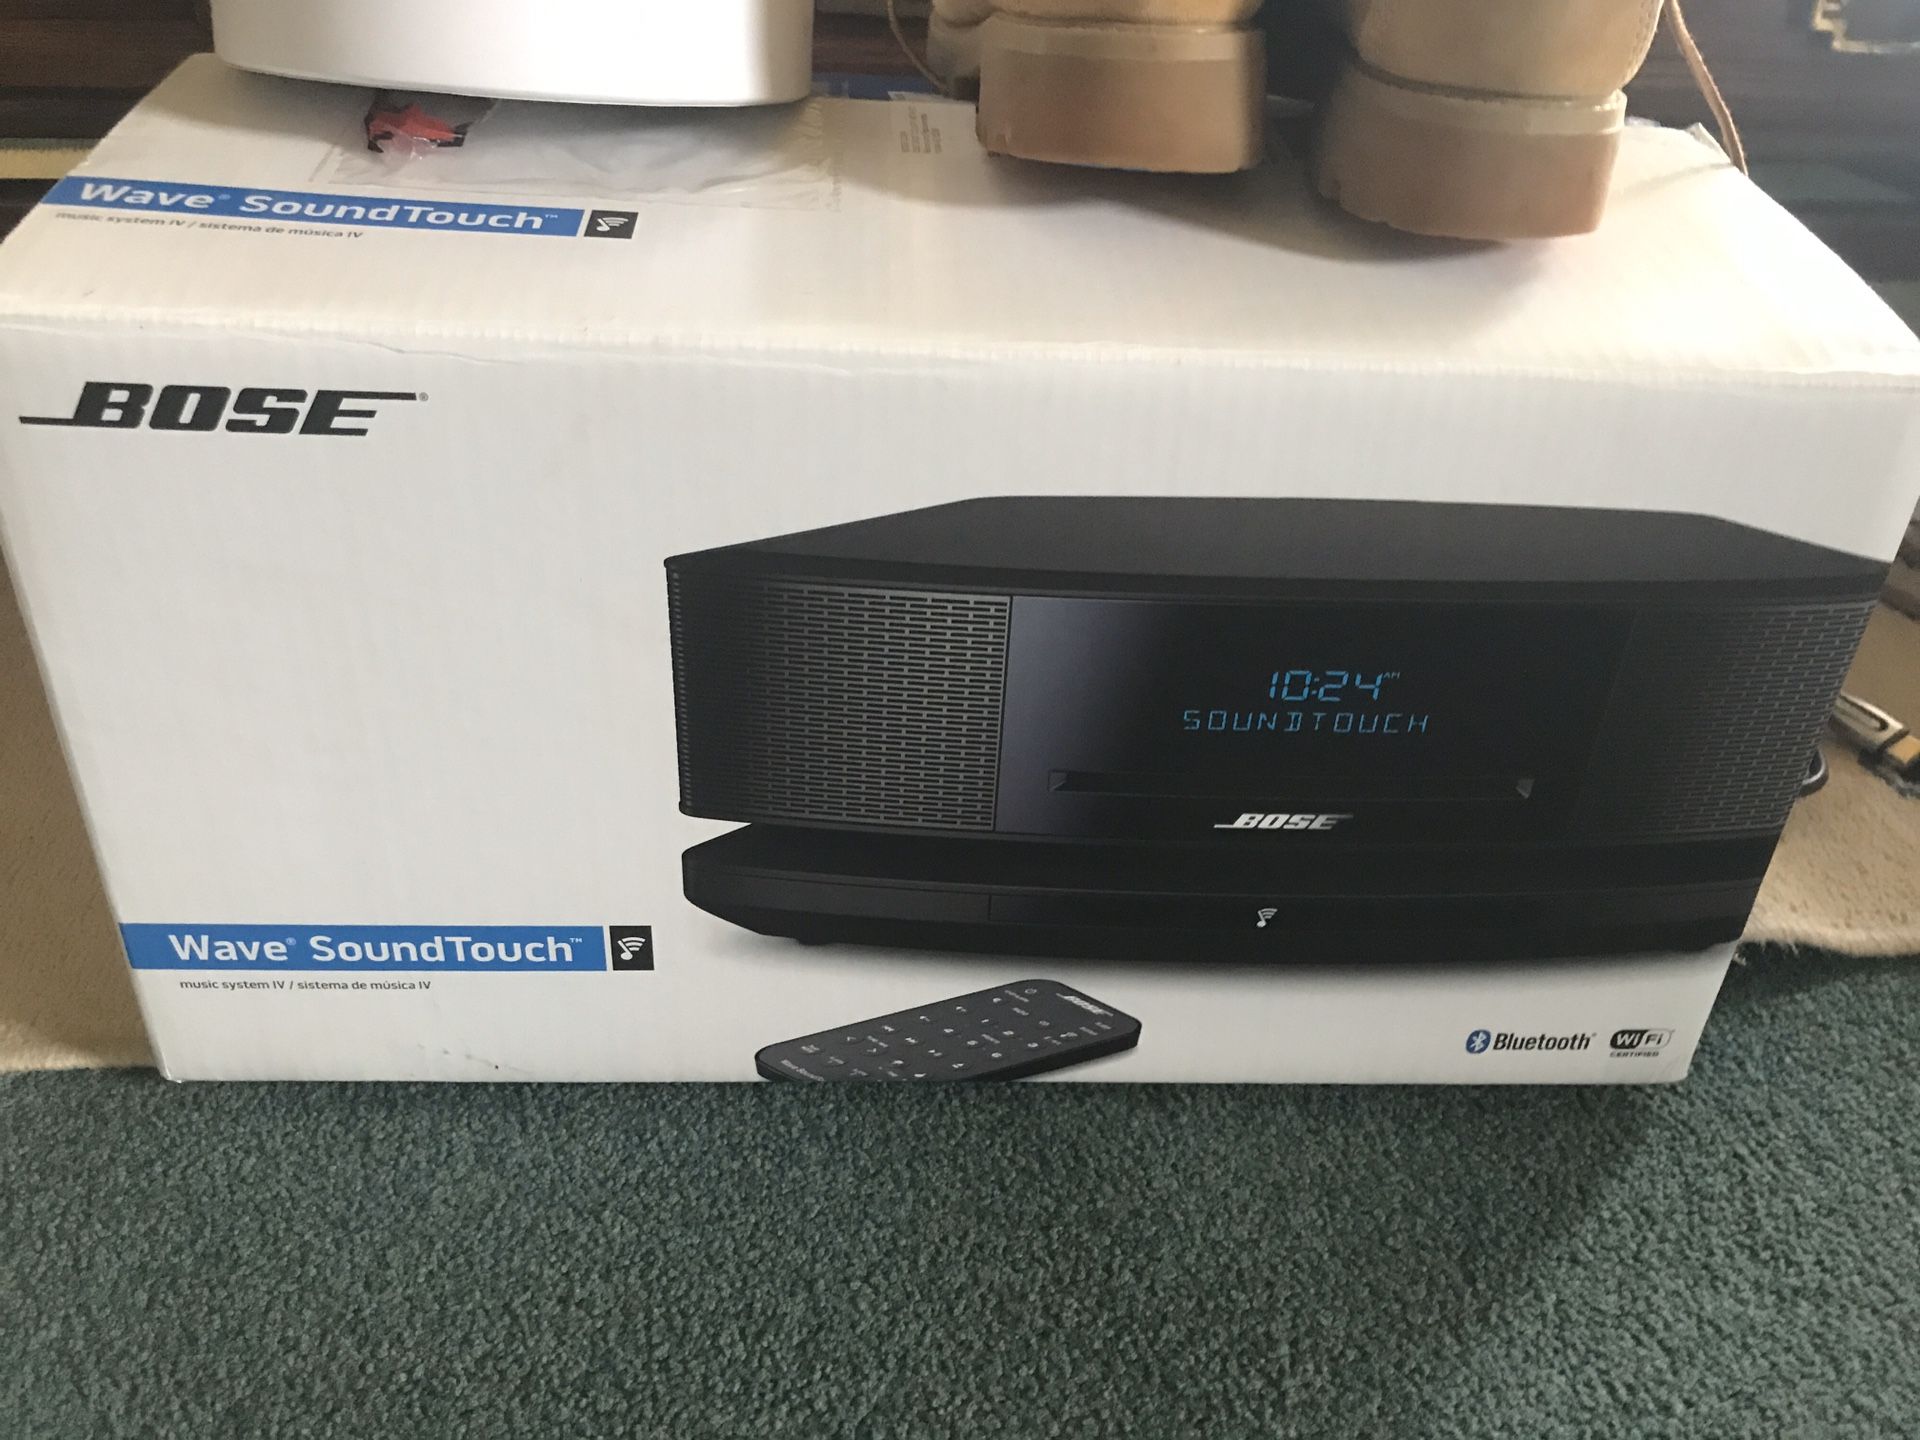 Bose SoundTouch IV Bluetooth wife speaker